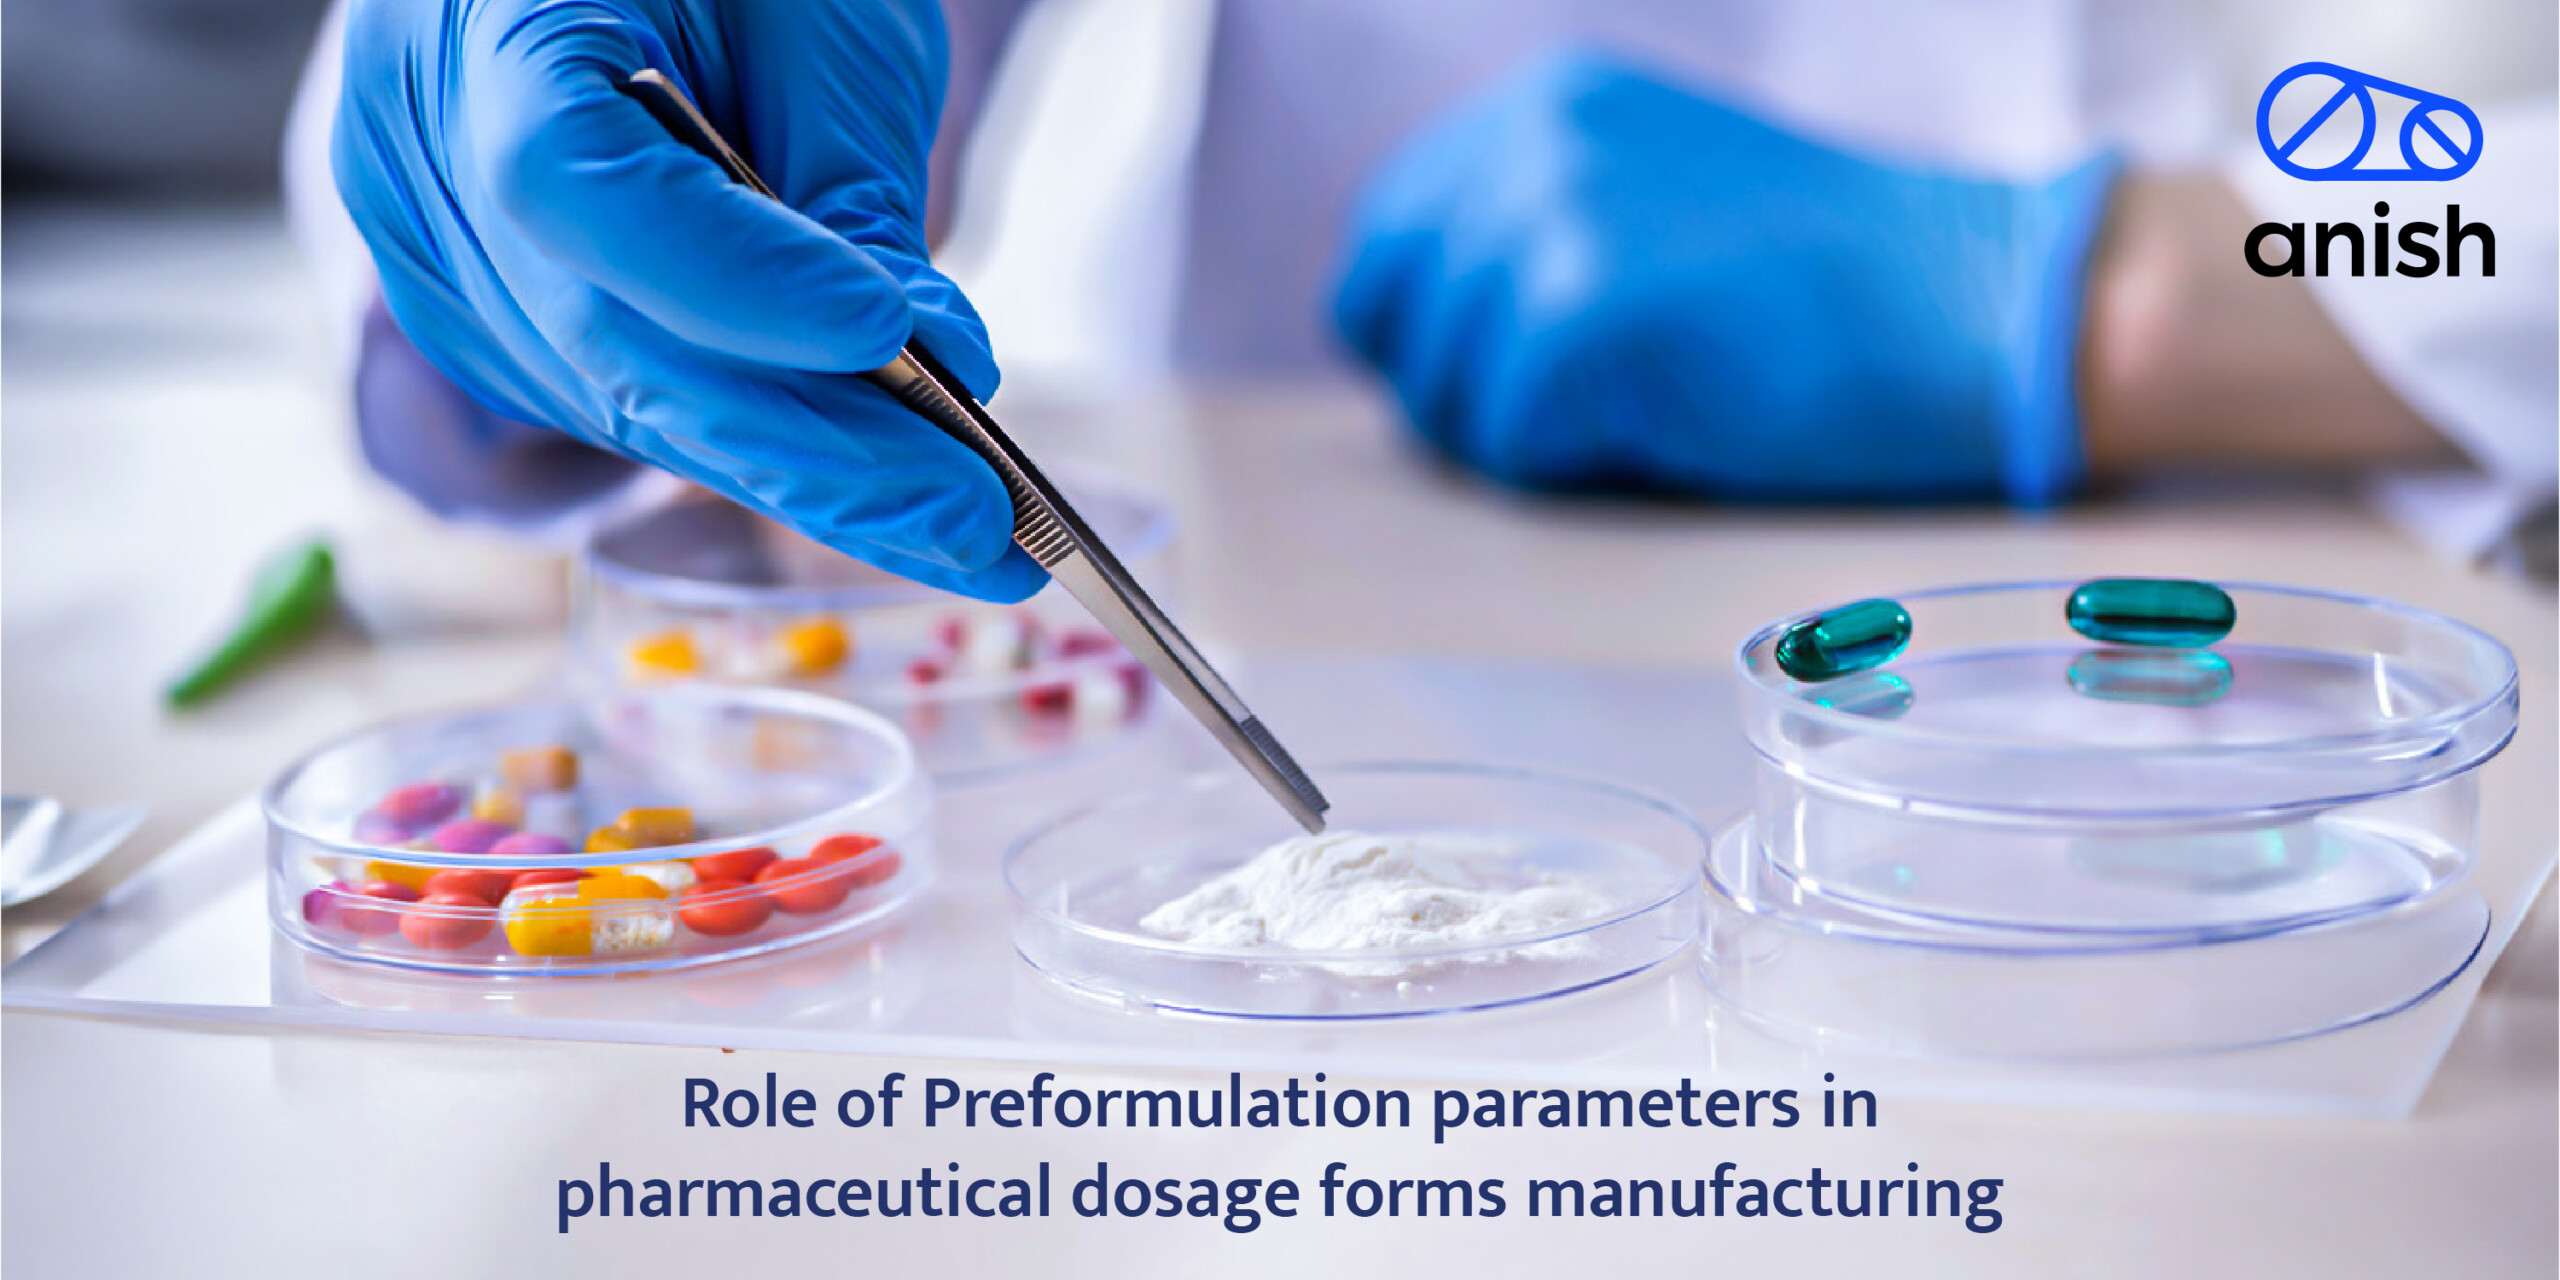 Role of Preformulation Parameters in Pharmaceutical Dosage Forms Manufacturing